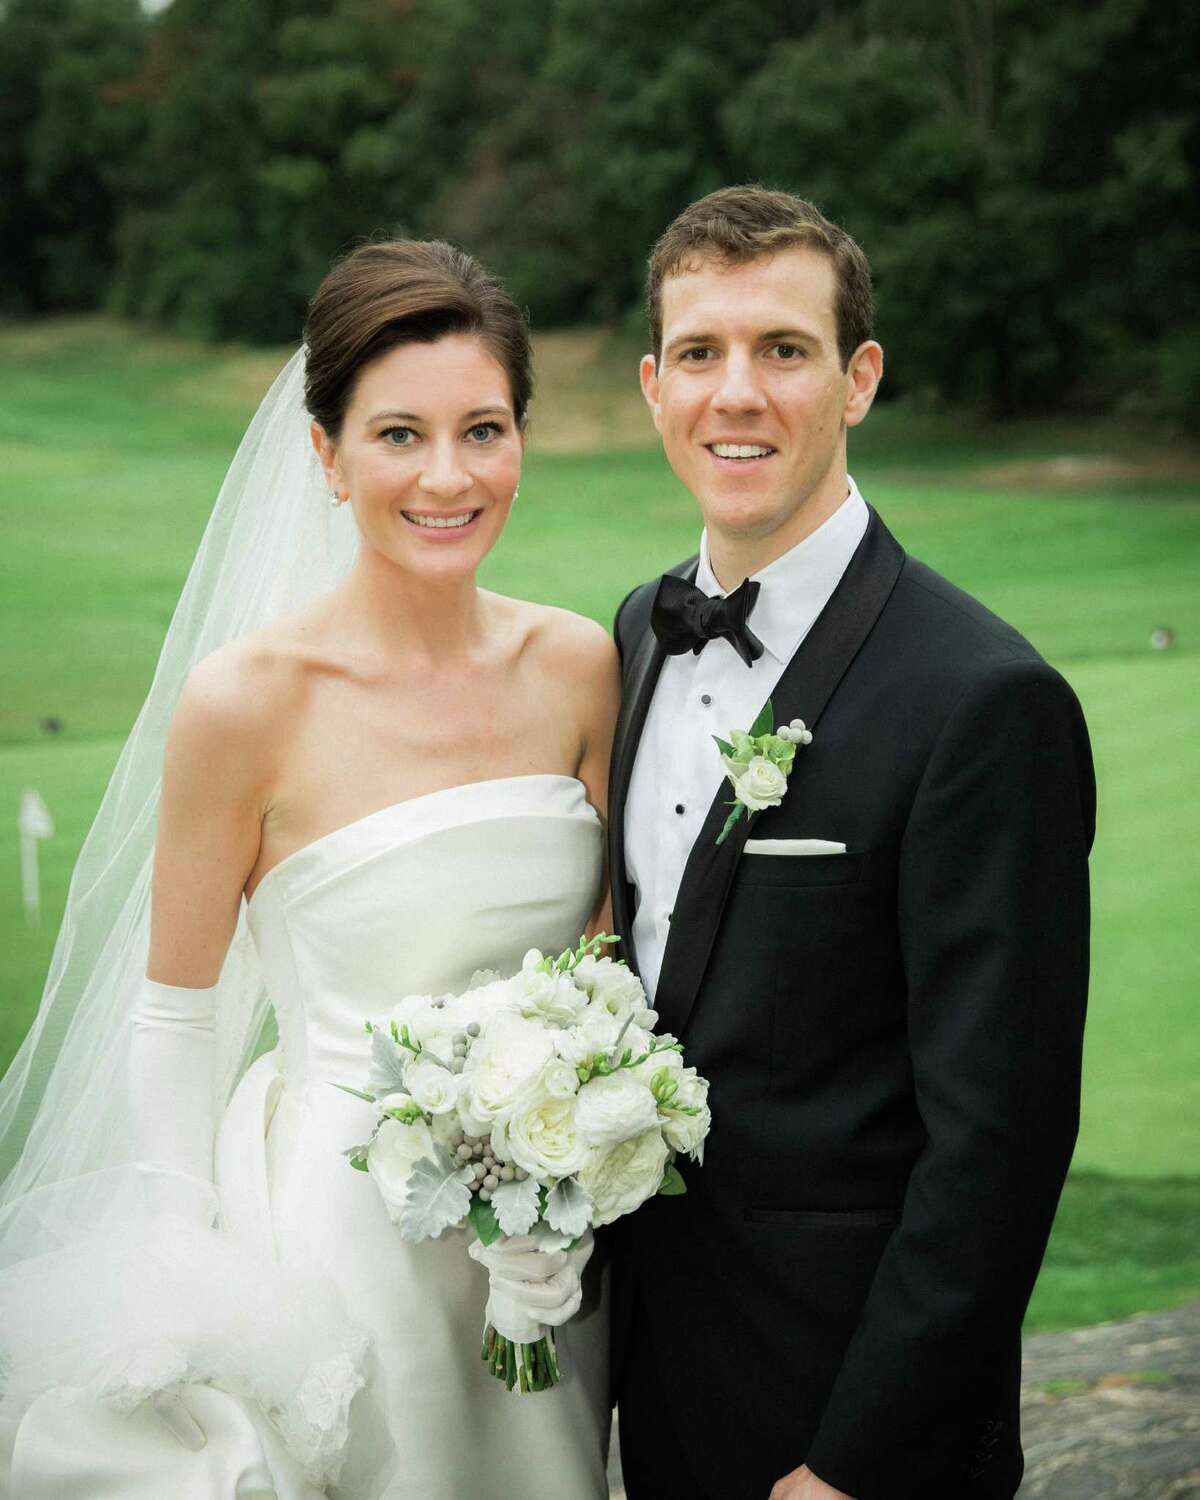 Kathleen Ann Whipple and Patrick John Mitchell were wed Oct. 8 in Rye, N.Y.